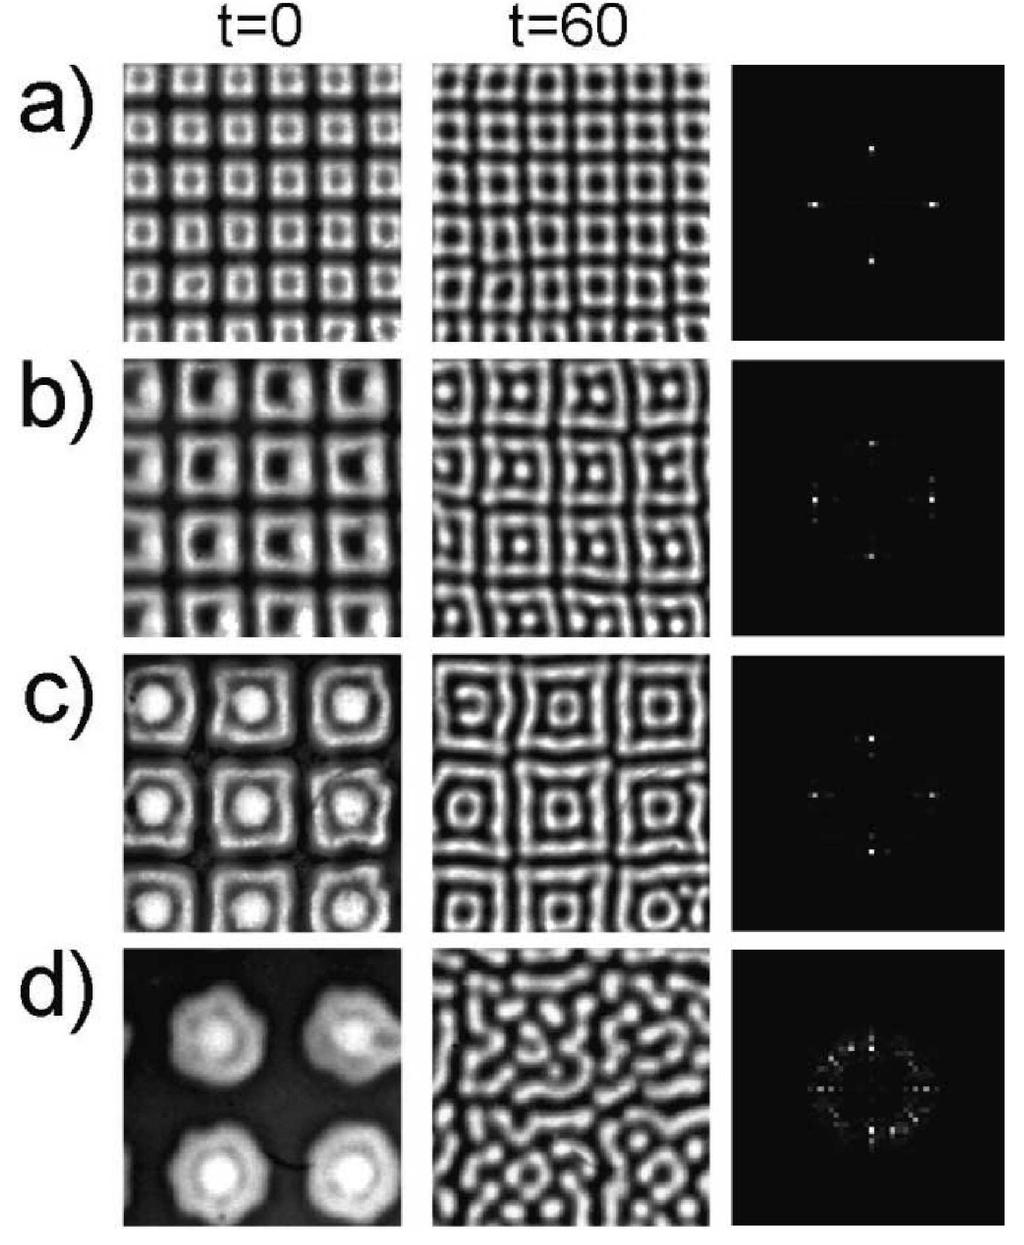 Experimental results, using spatially periodic illumination on the CDIMA reaction in a regime where the system without illumination exhibits labyrinthine patterns [30].